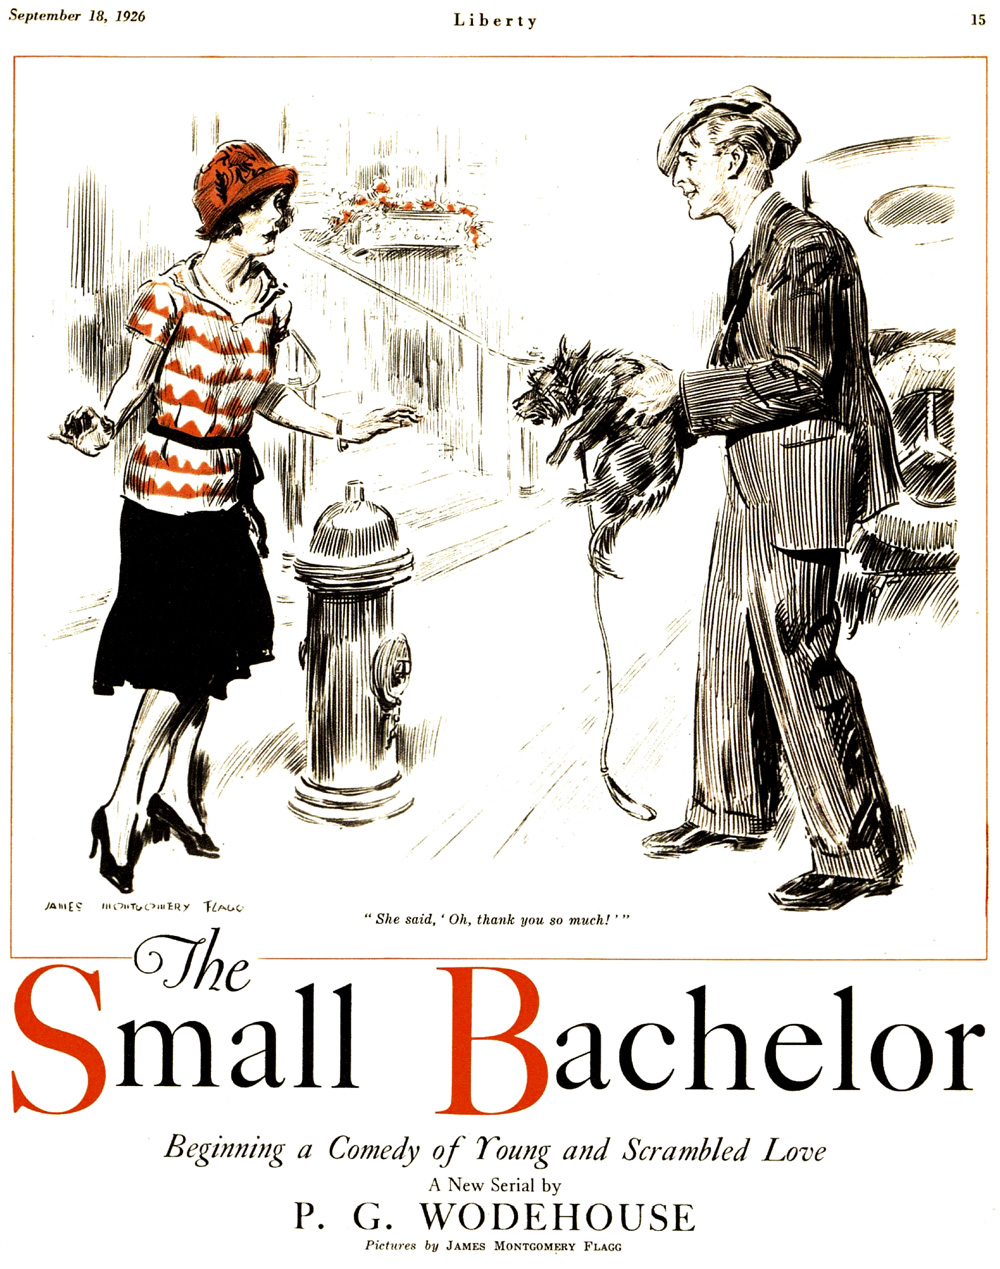 The Small Bachelor - Episode 1